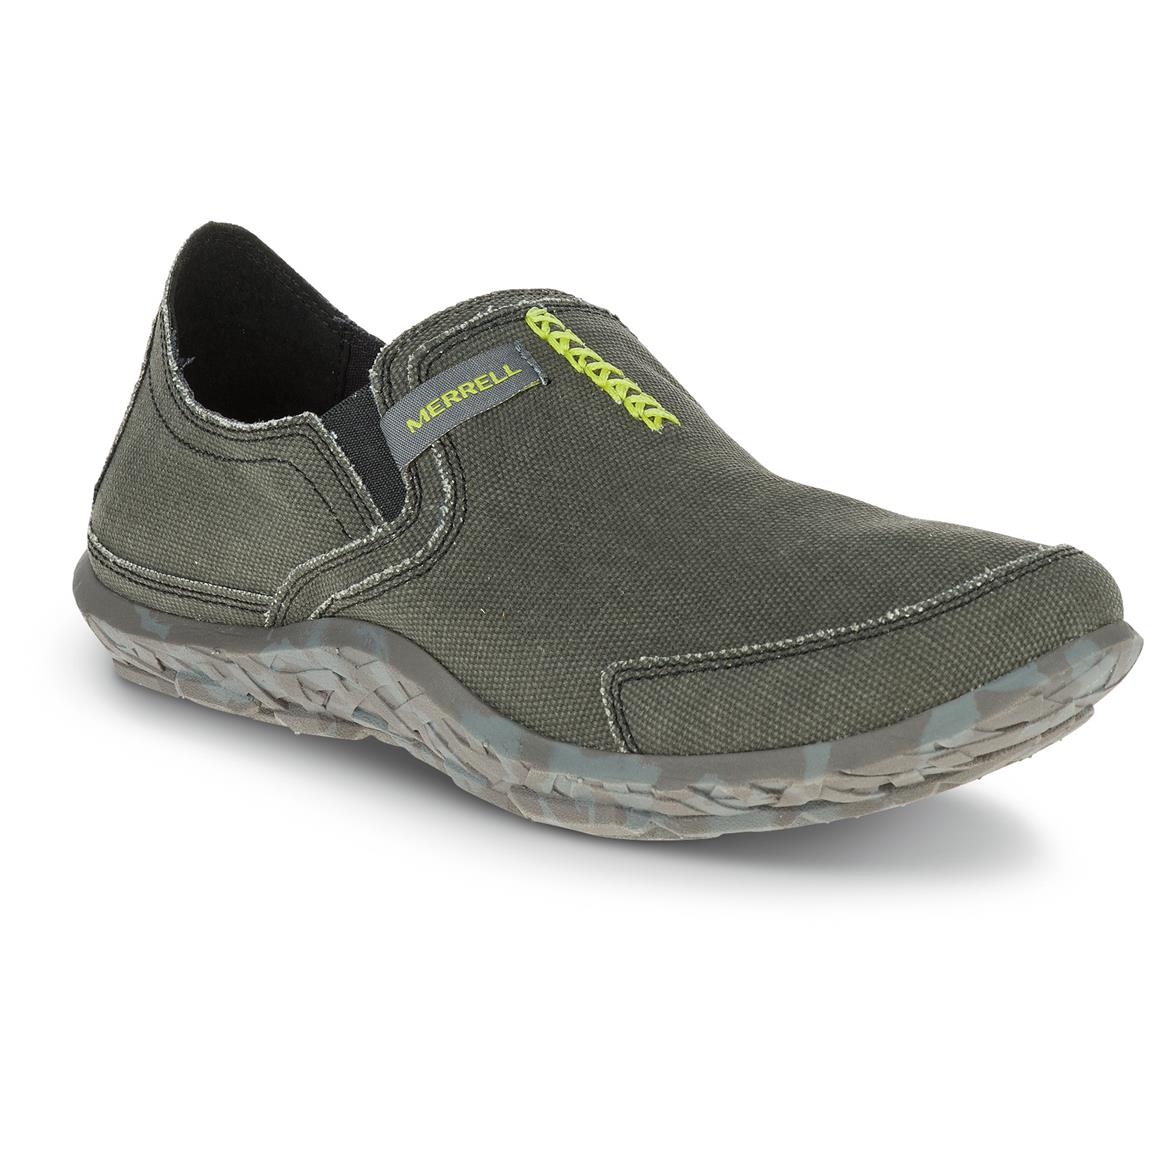 Merrell Men's Slipper Shoes 665554, Casual Shoes at